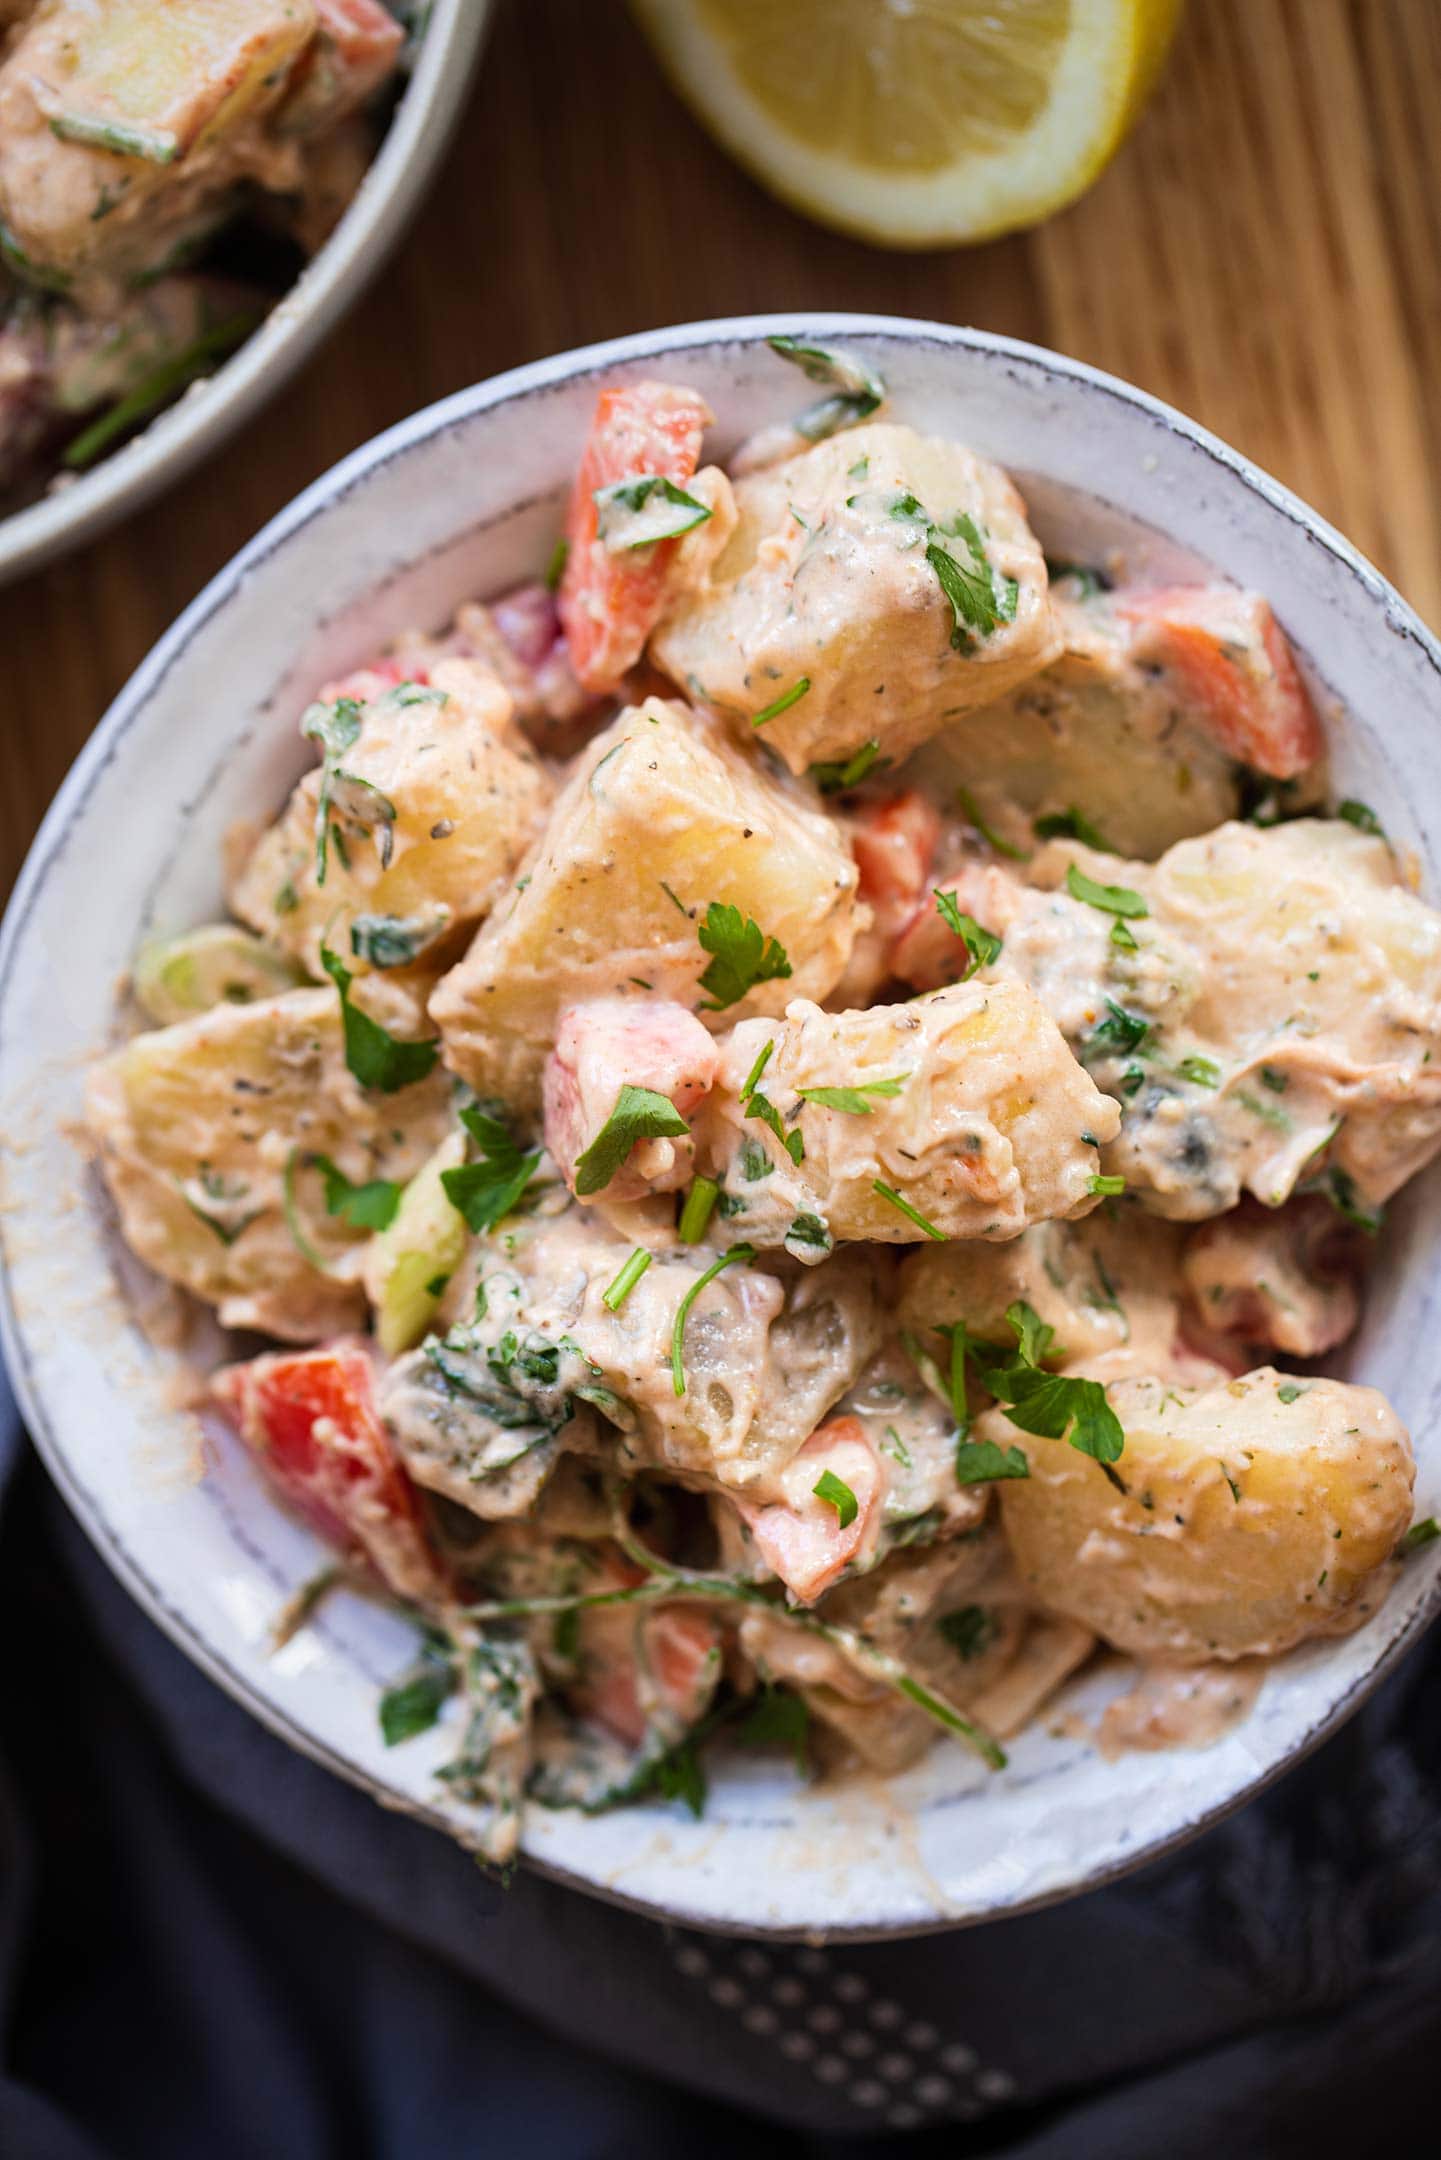 Bowl of vegetable potato salad with a dairy-free sauce